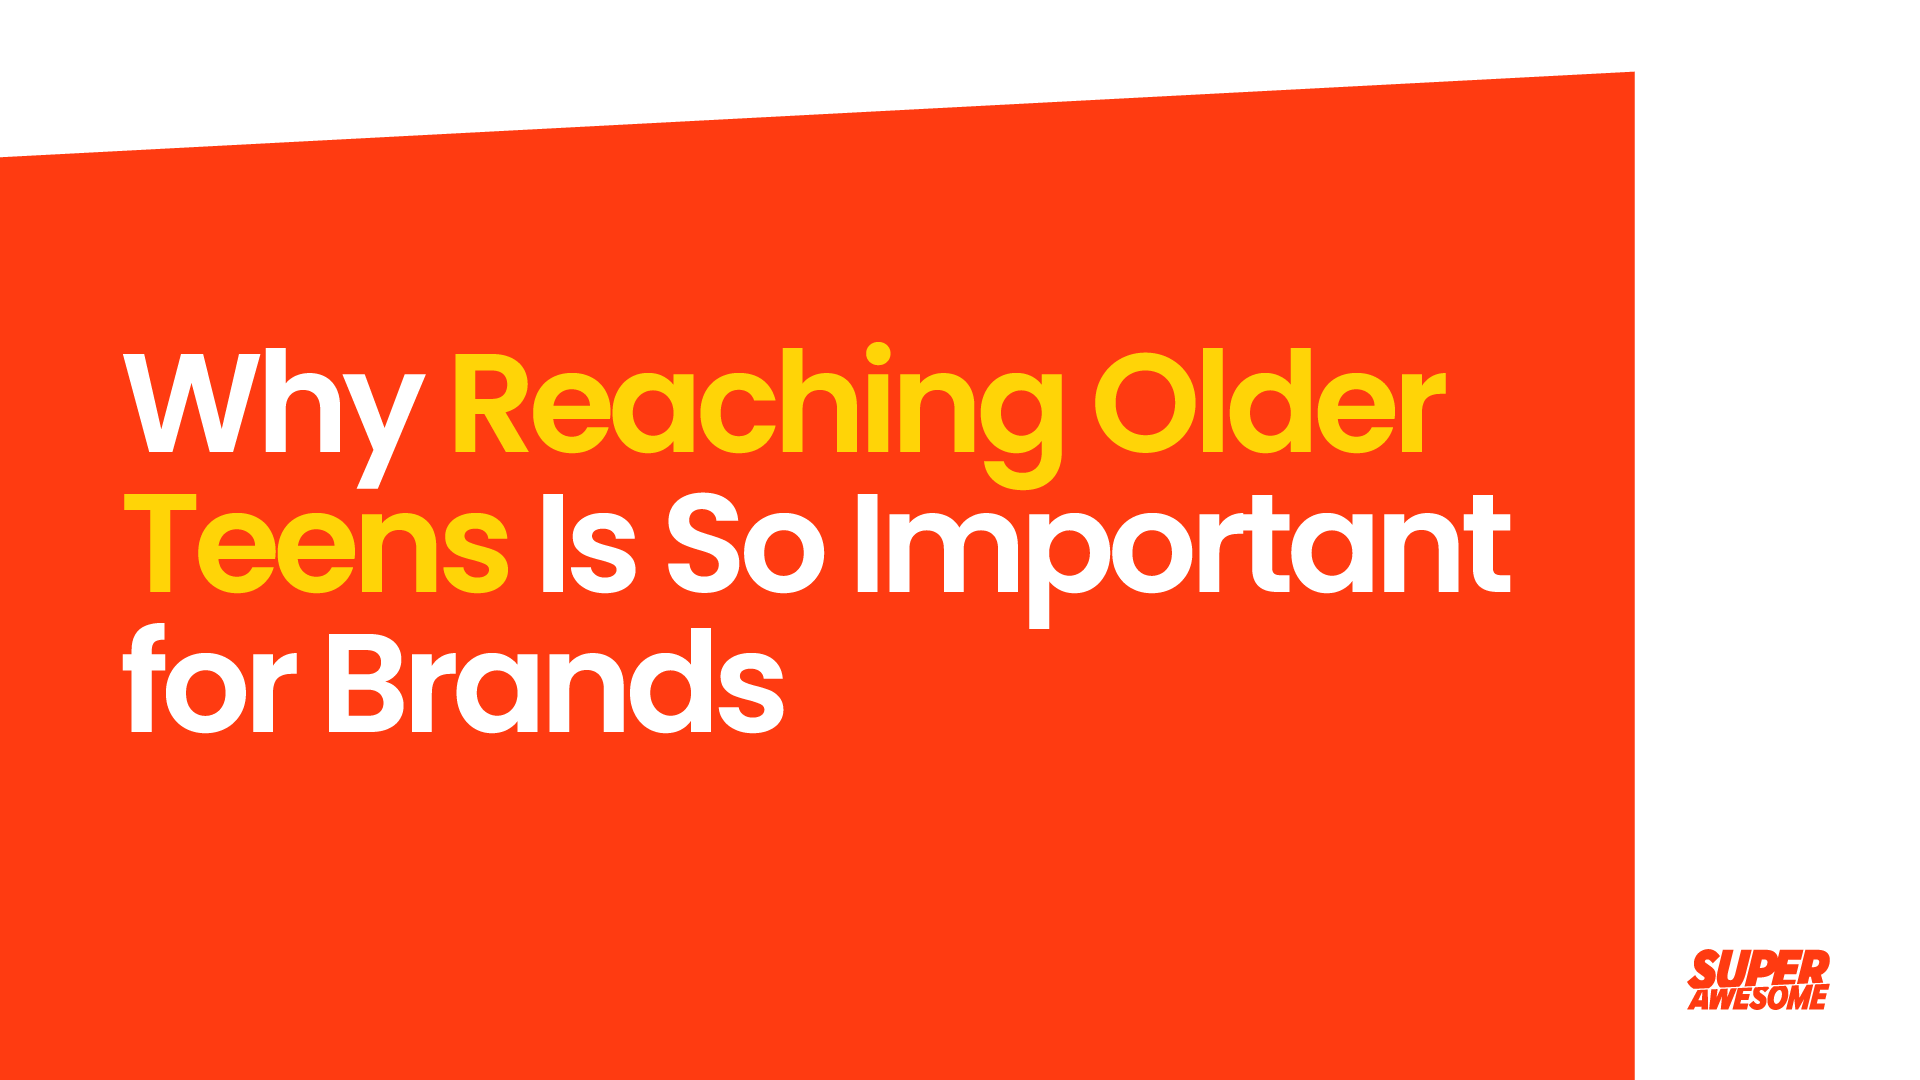 Why Reaching Older Teens Is So Important for Brands